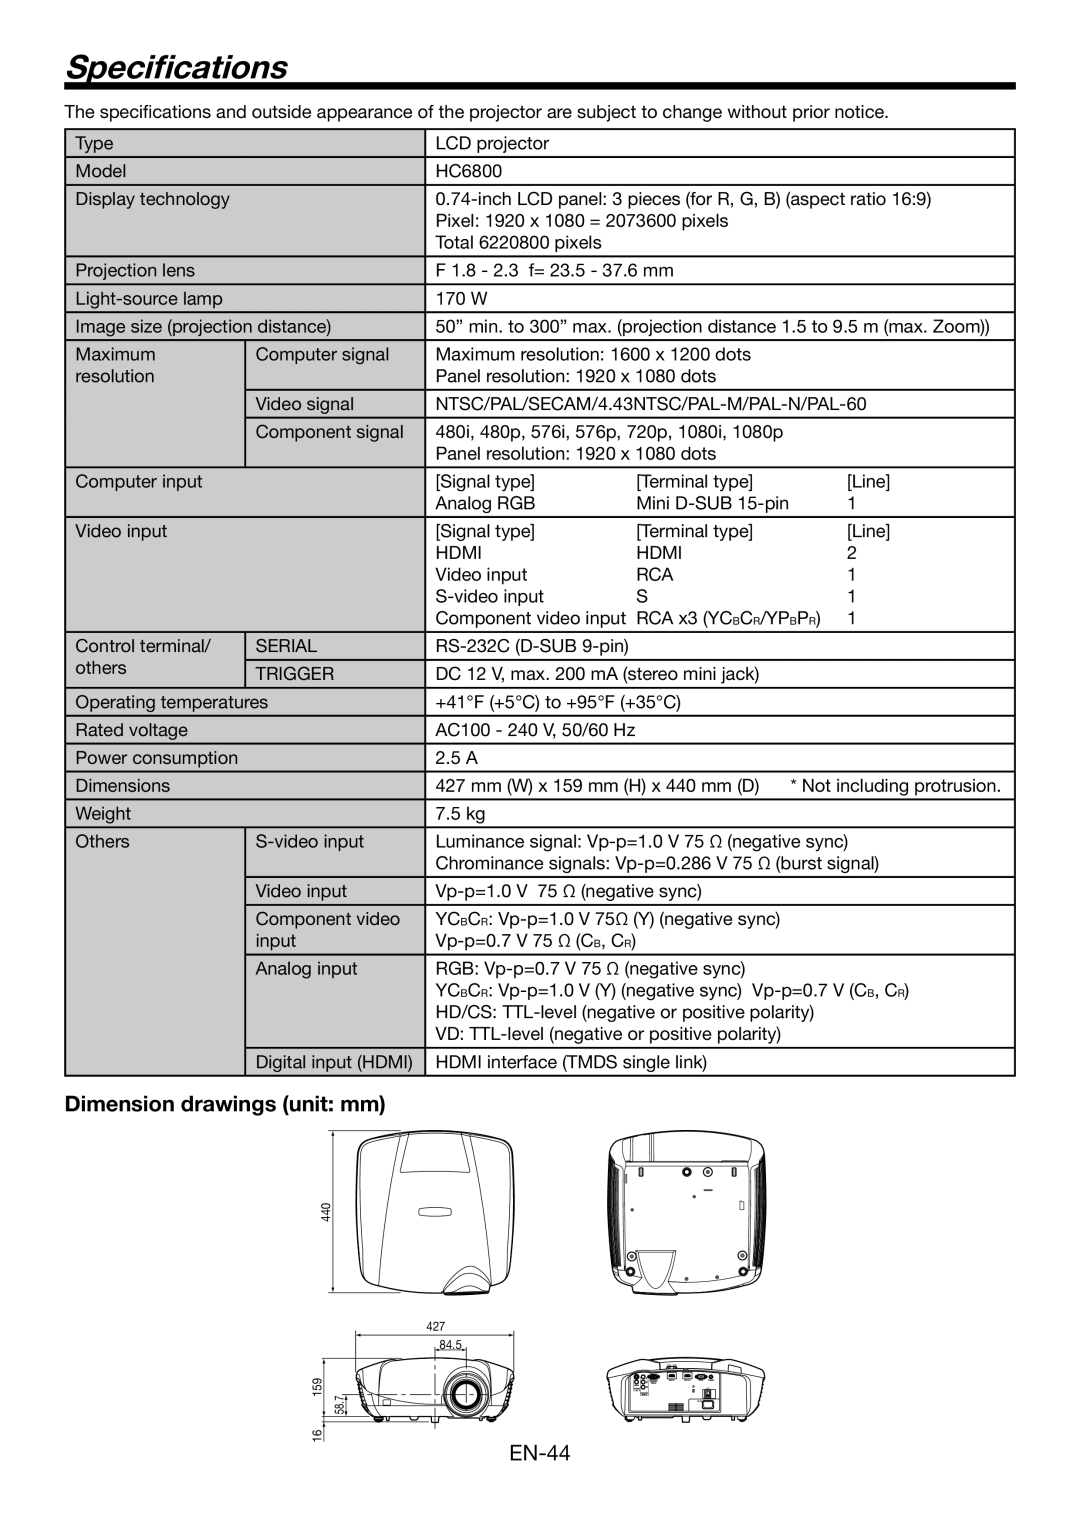 Mitsubishi Electronics HC6800 user manual Specifications, Dimension drawings unit mm 